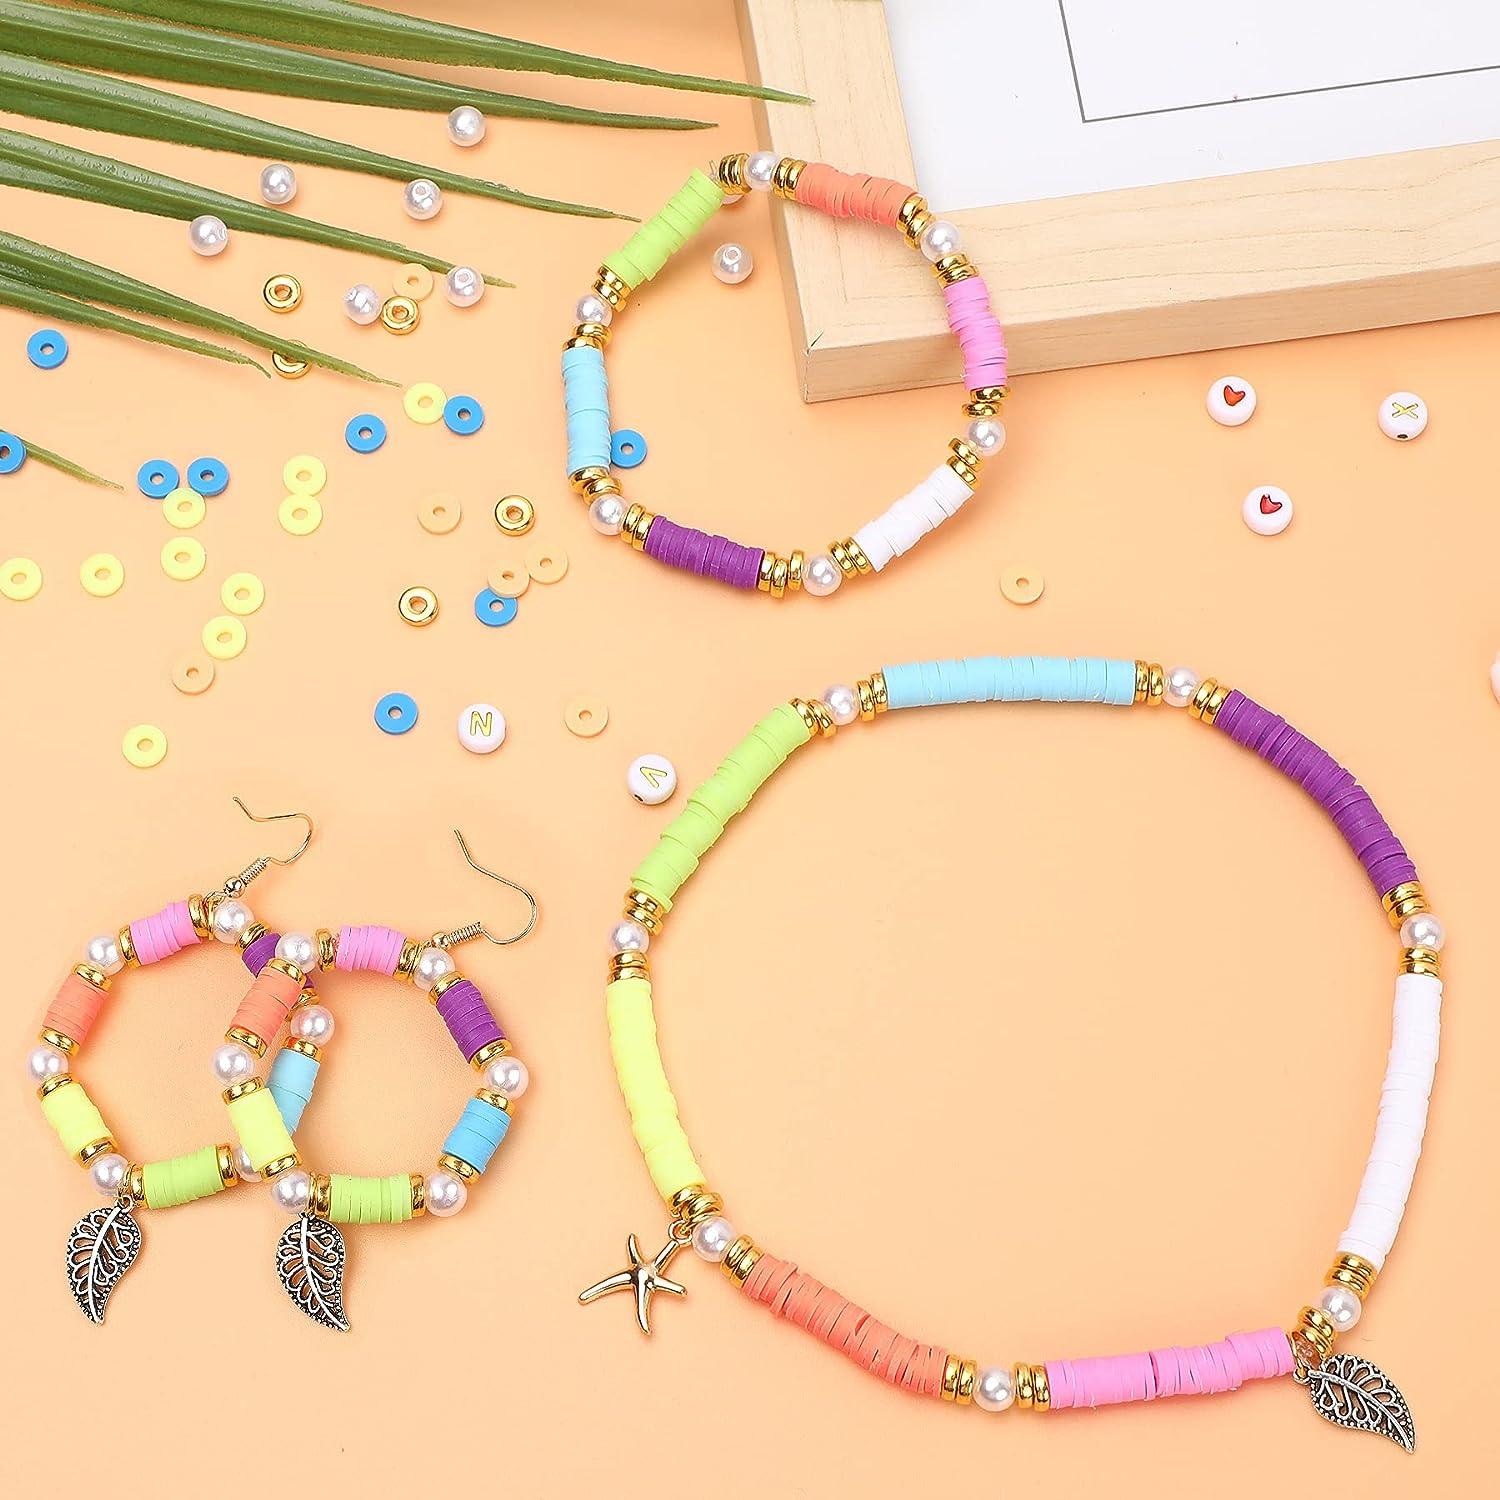 Creative leisure kit: personalized beads and bracelets to create